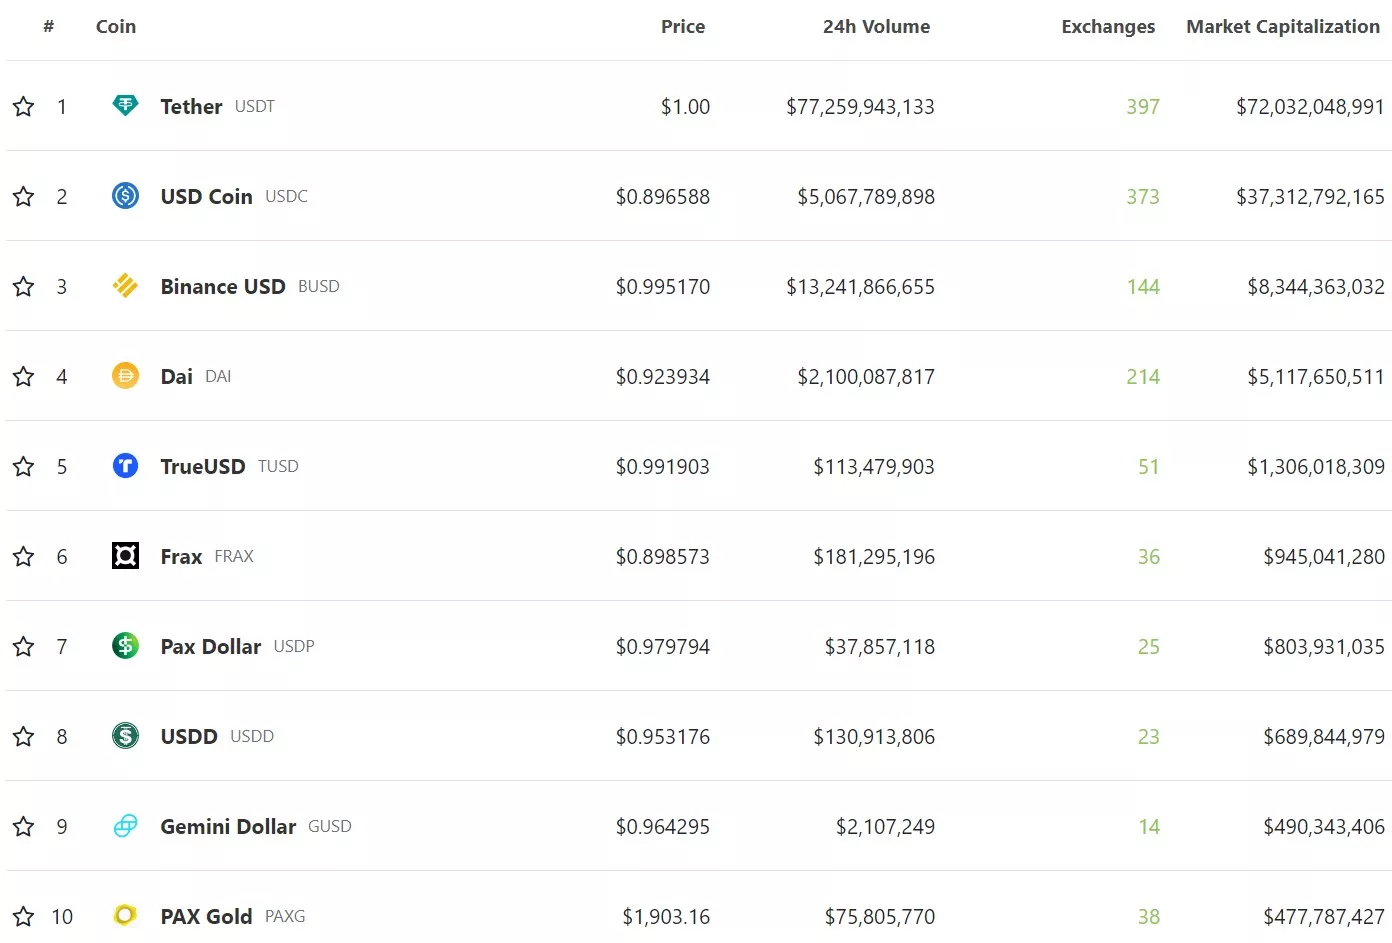 Top 10 stablecoin capitalization